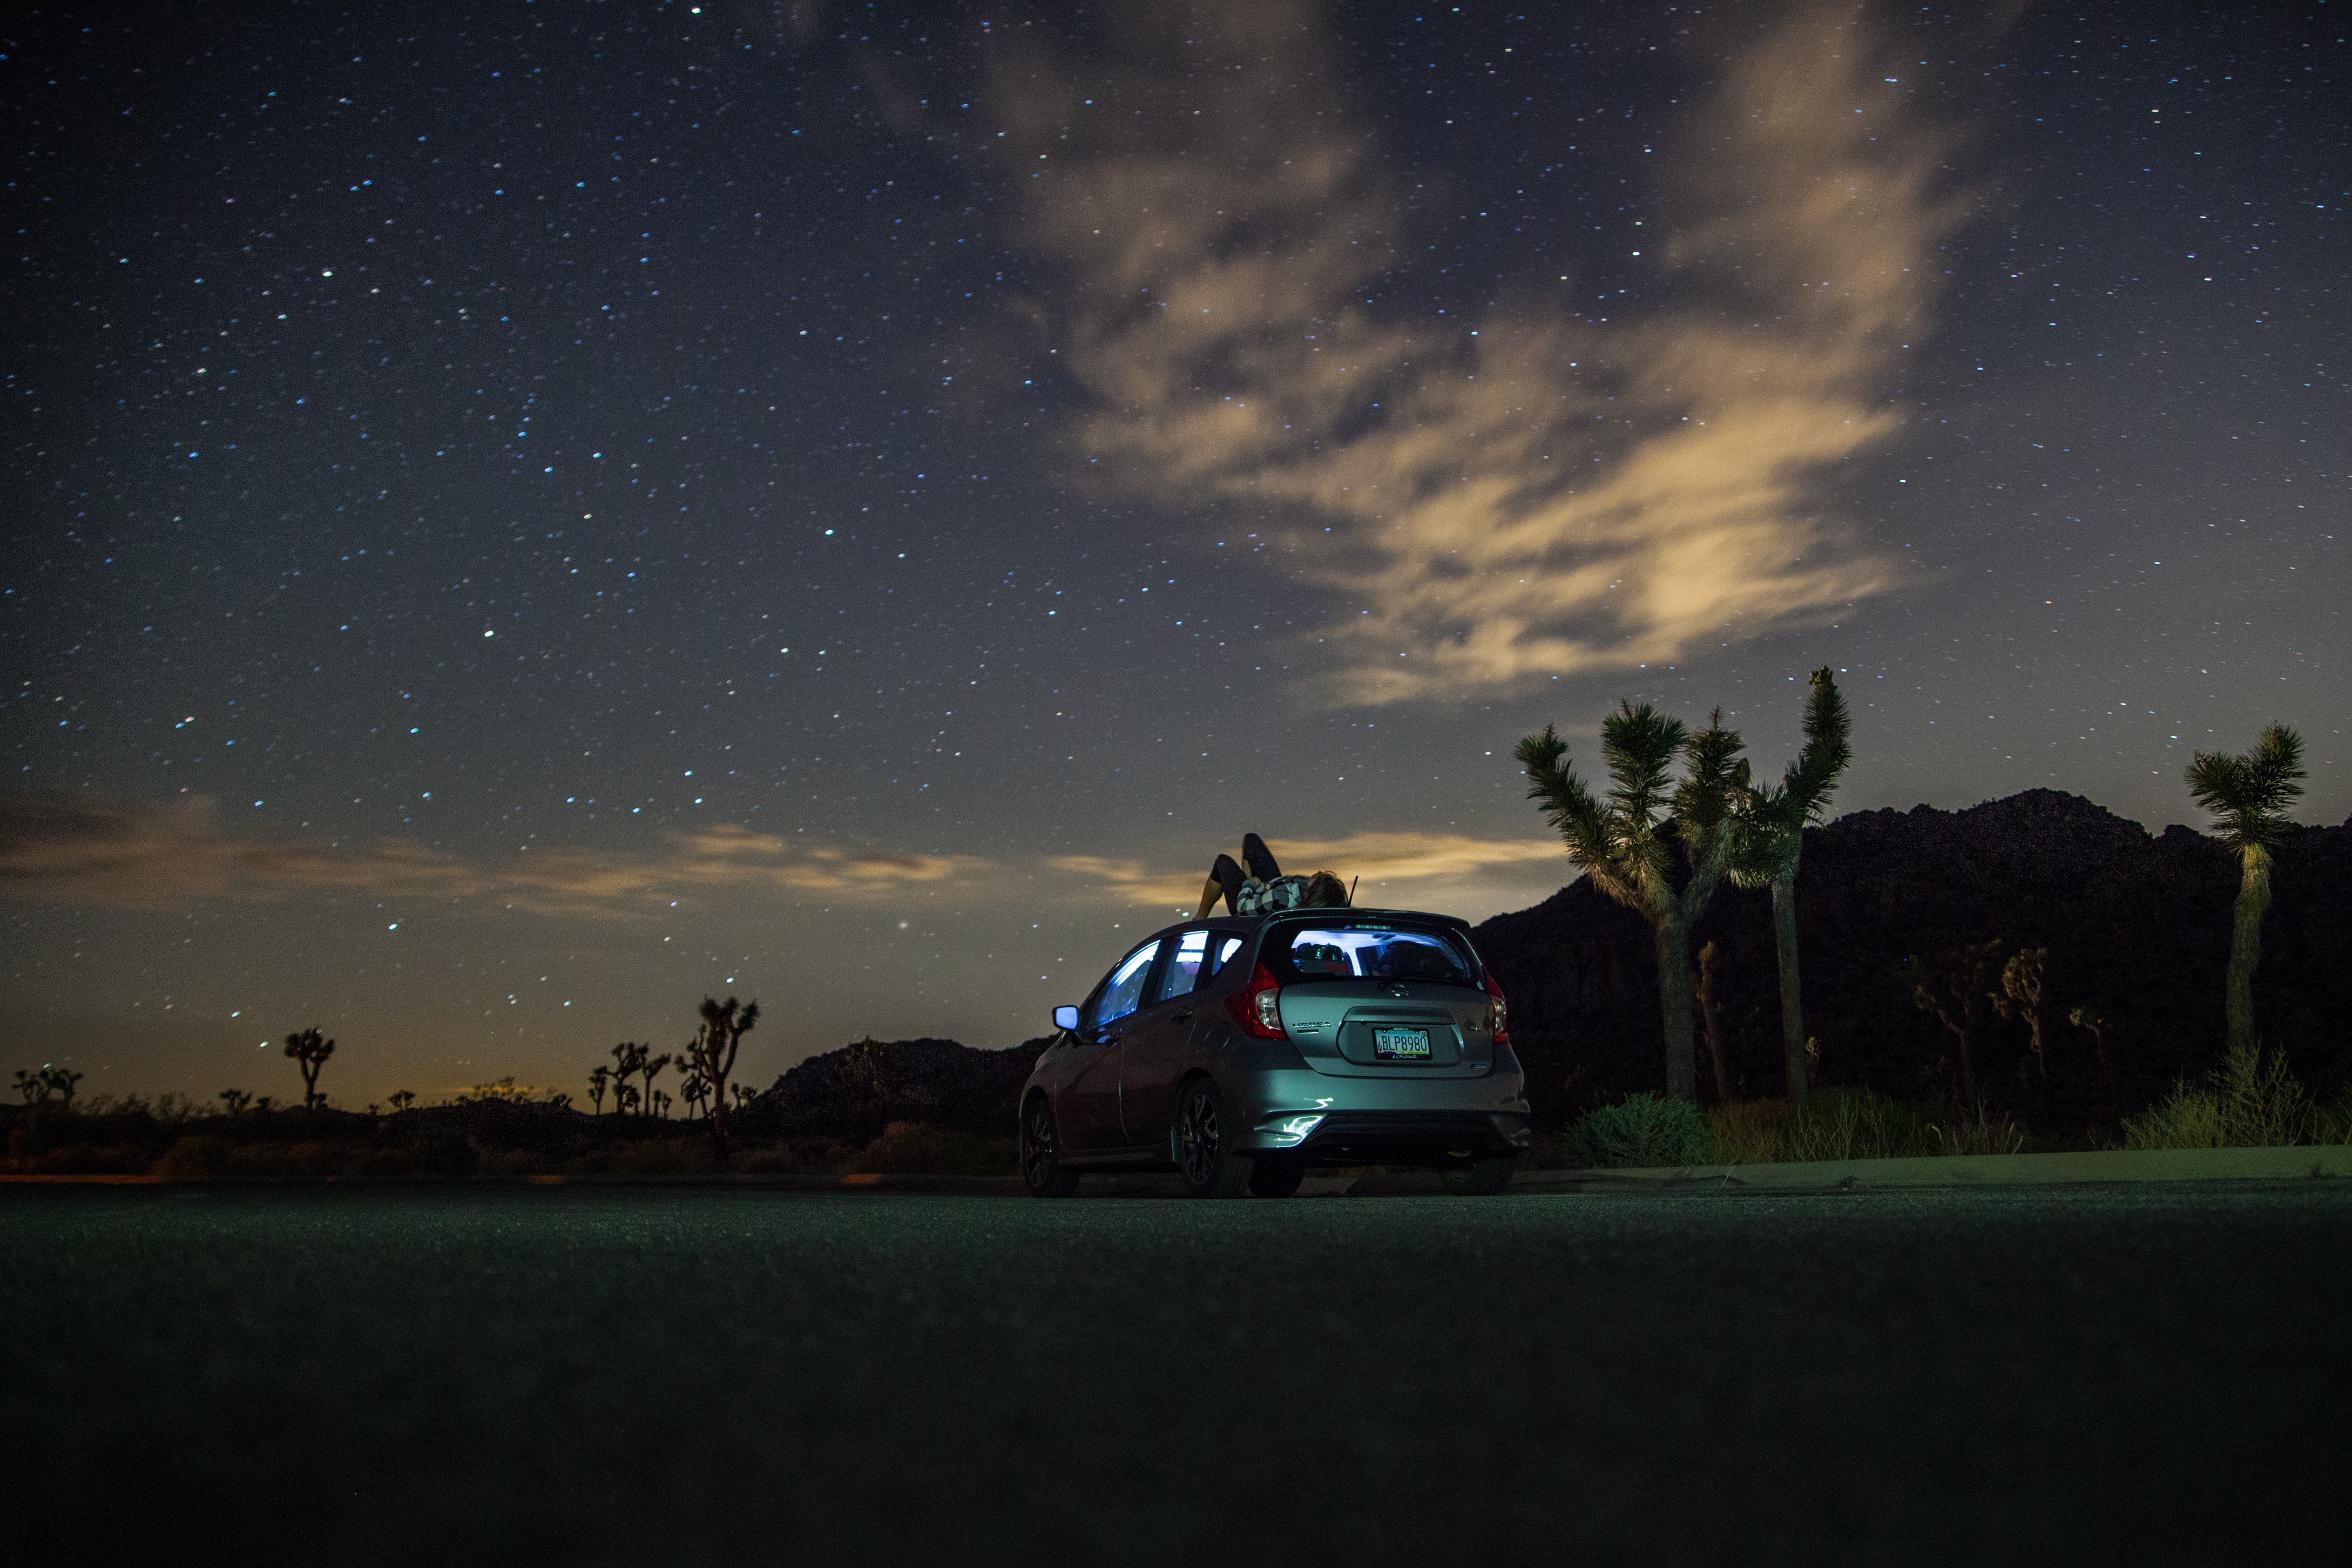 privacy, loneliness, human, palms, cars, seclusion, car, starry sky, person cellphone